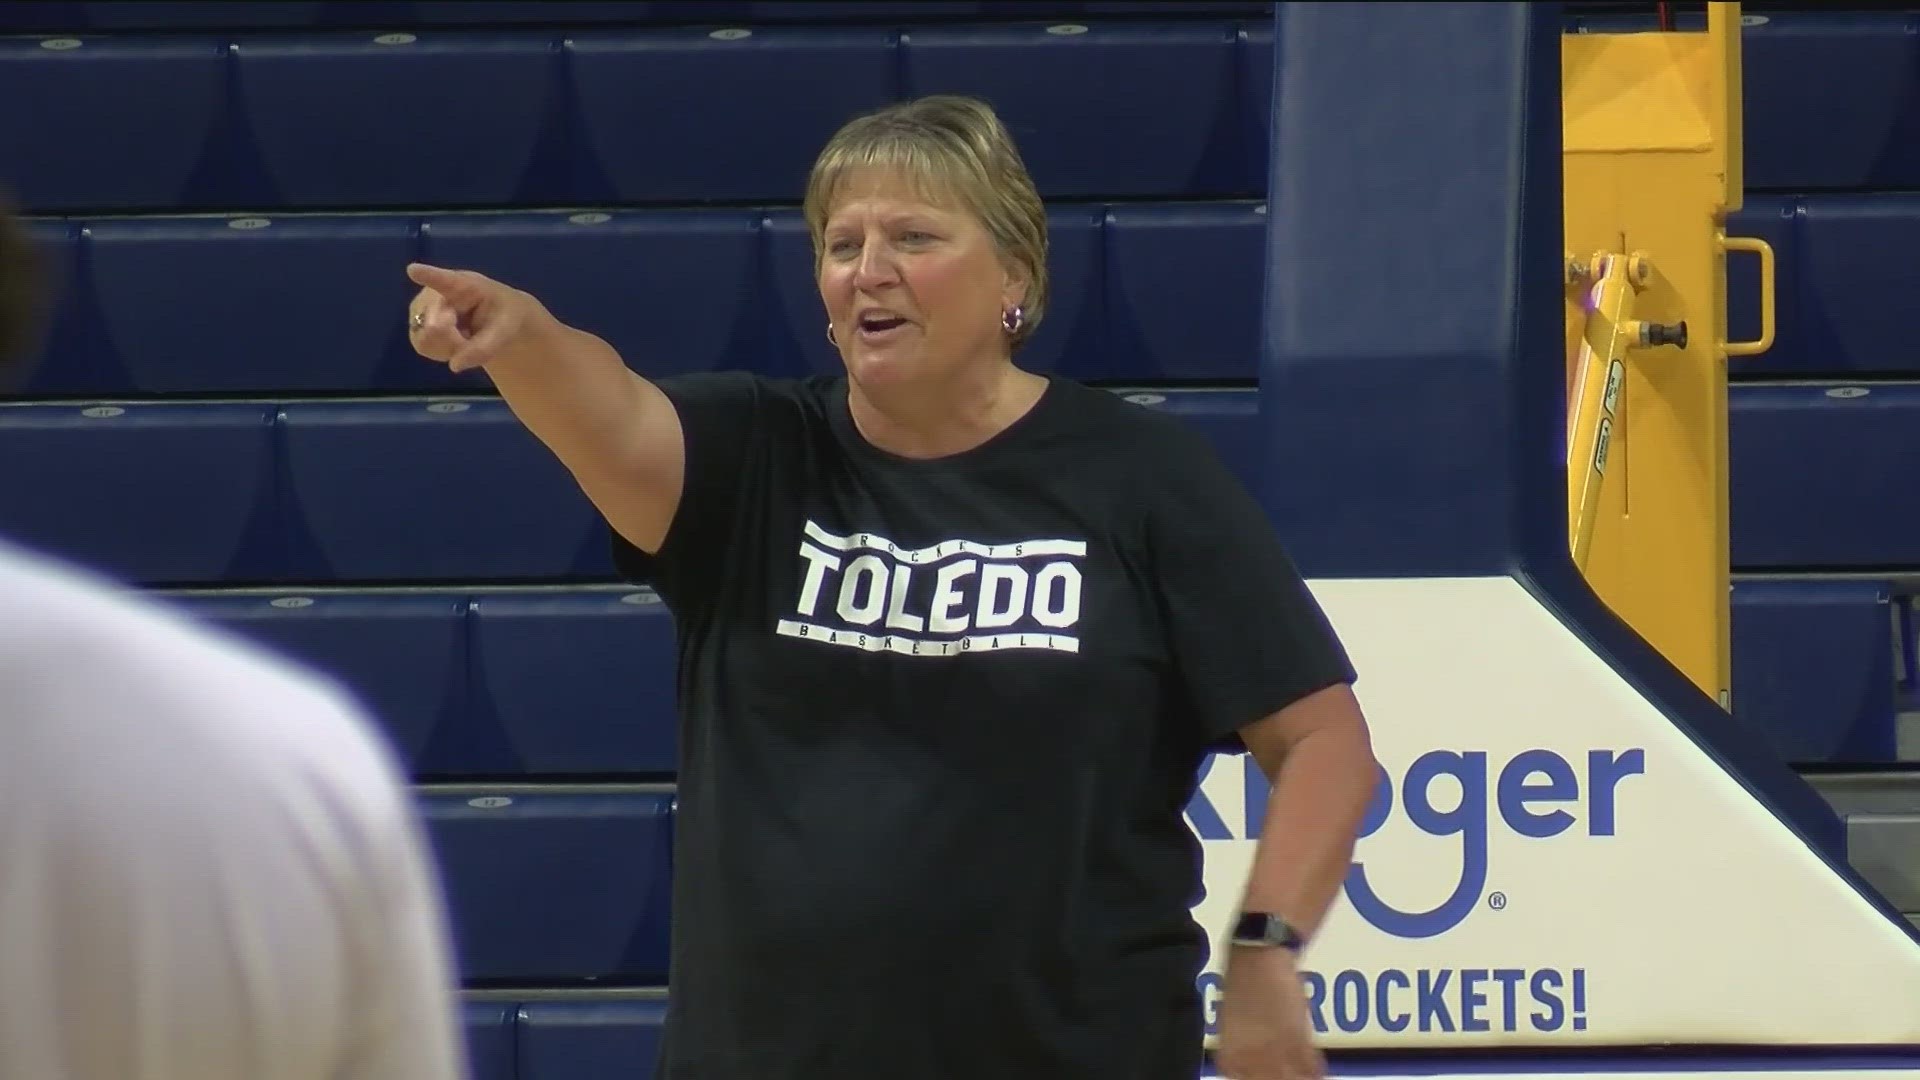 UToledo Women's Basketball Coach Tricia Cullop talks how she found her inspiration to pursue a career in sports.